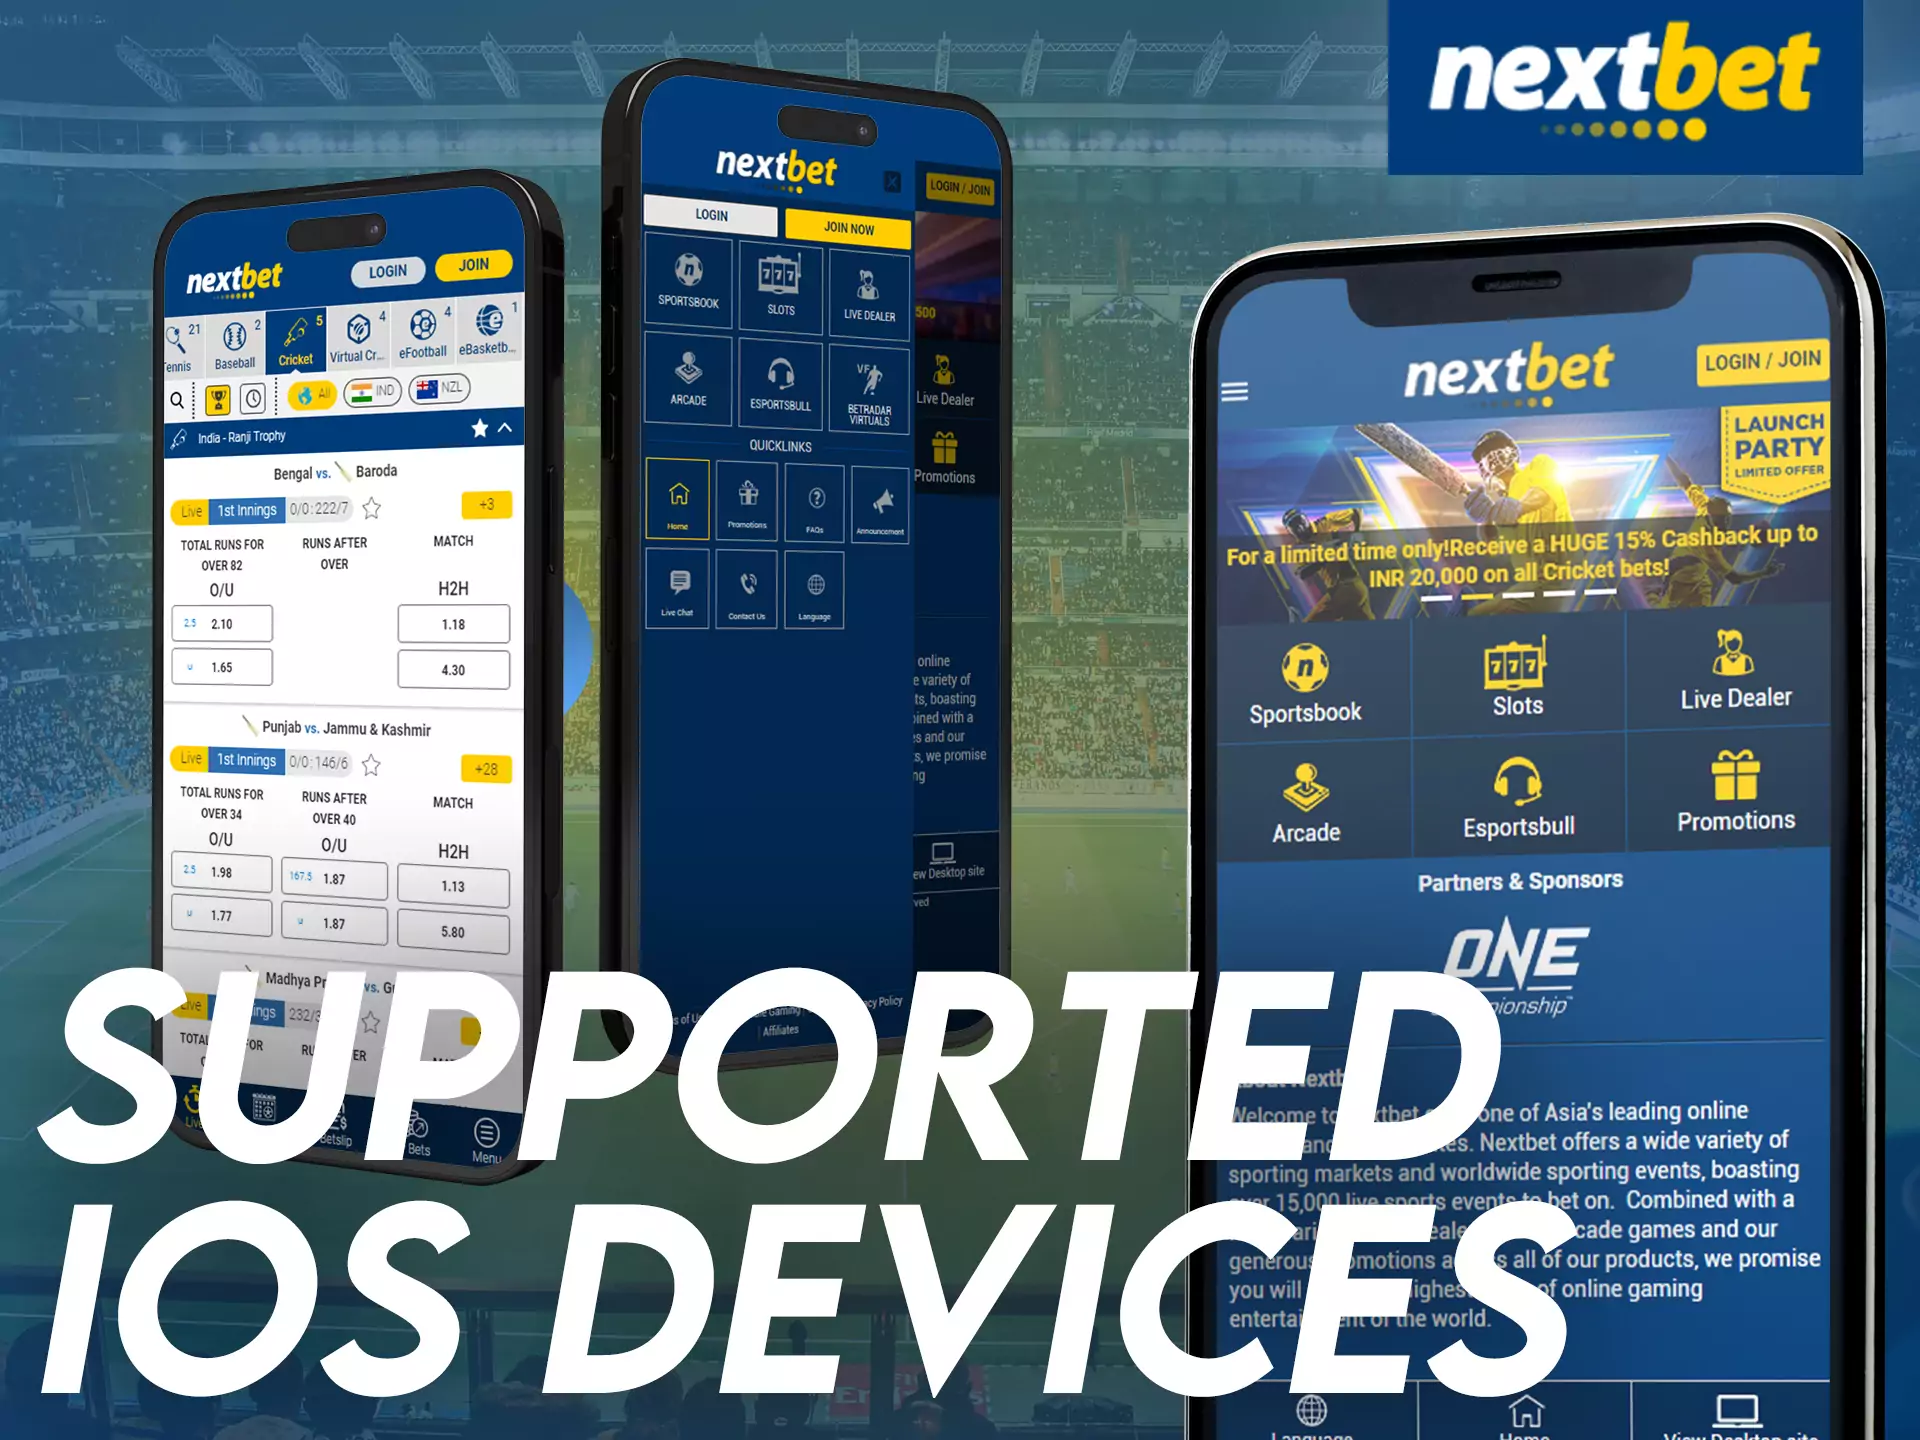 The Nextbet application supports many different devices on iOS.